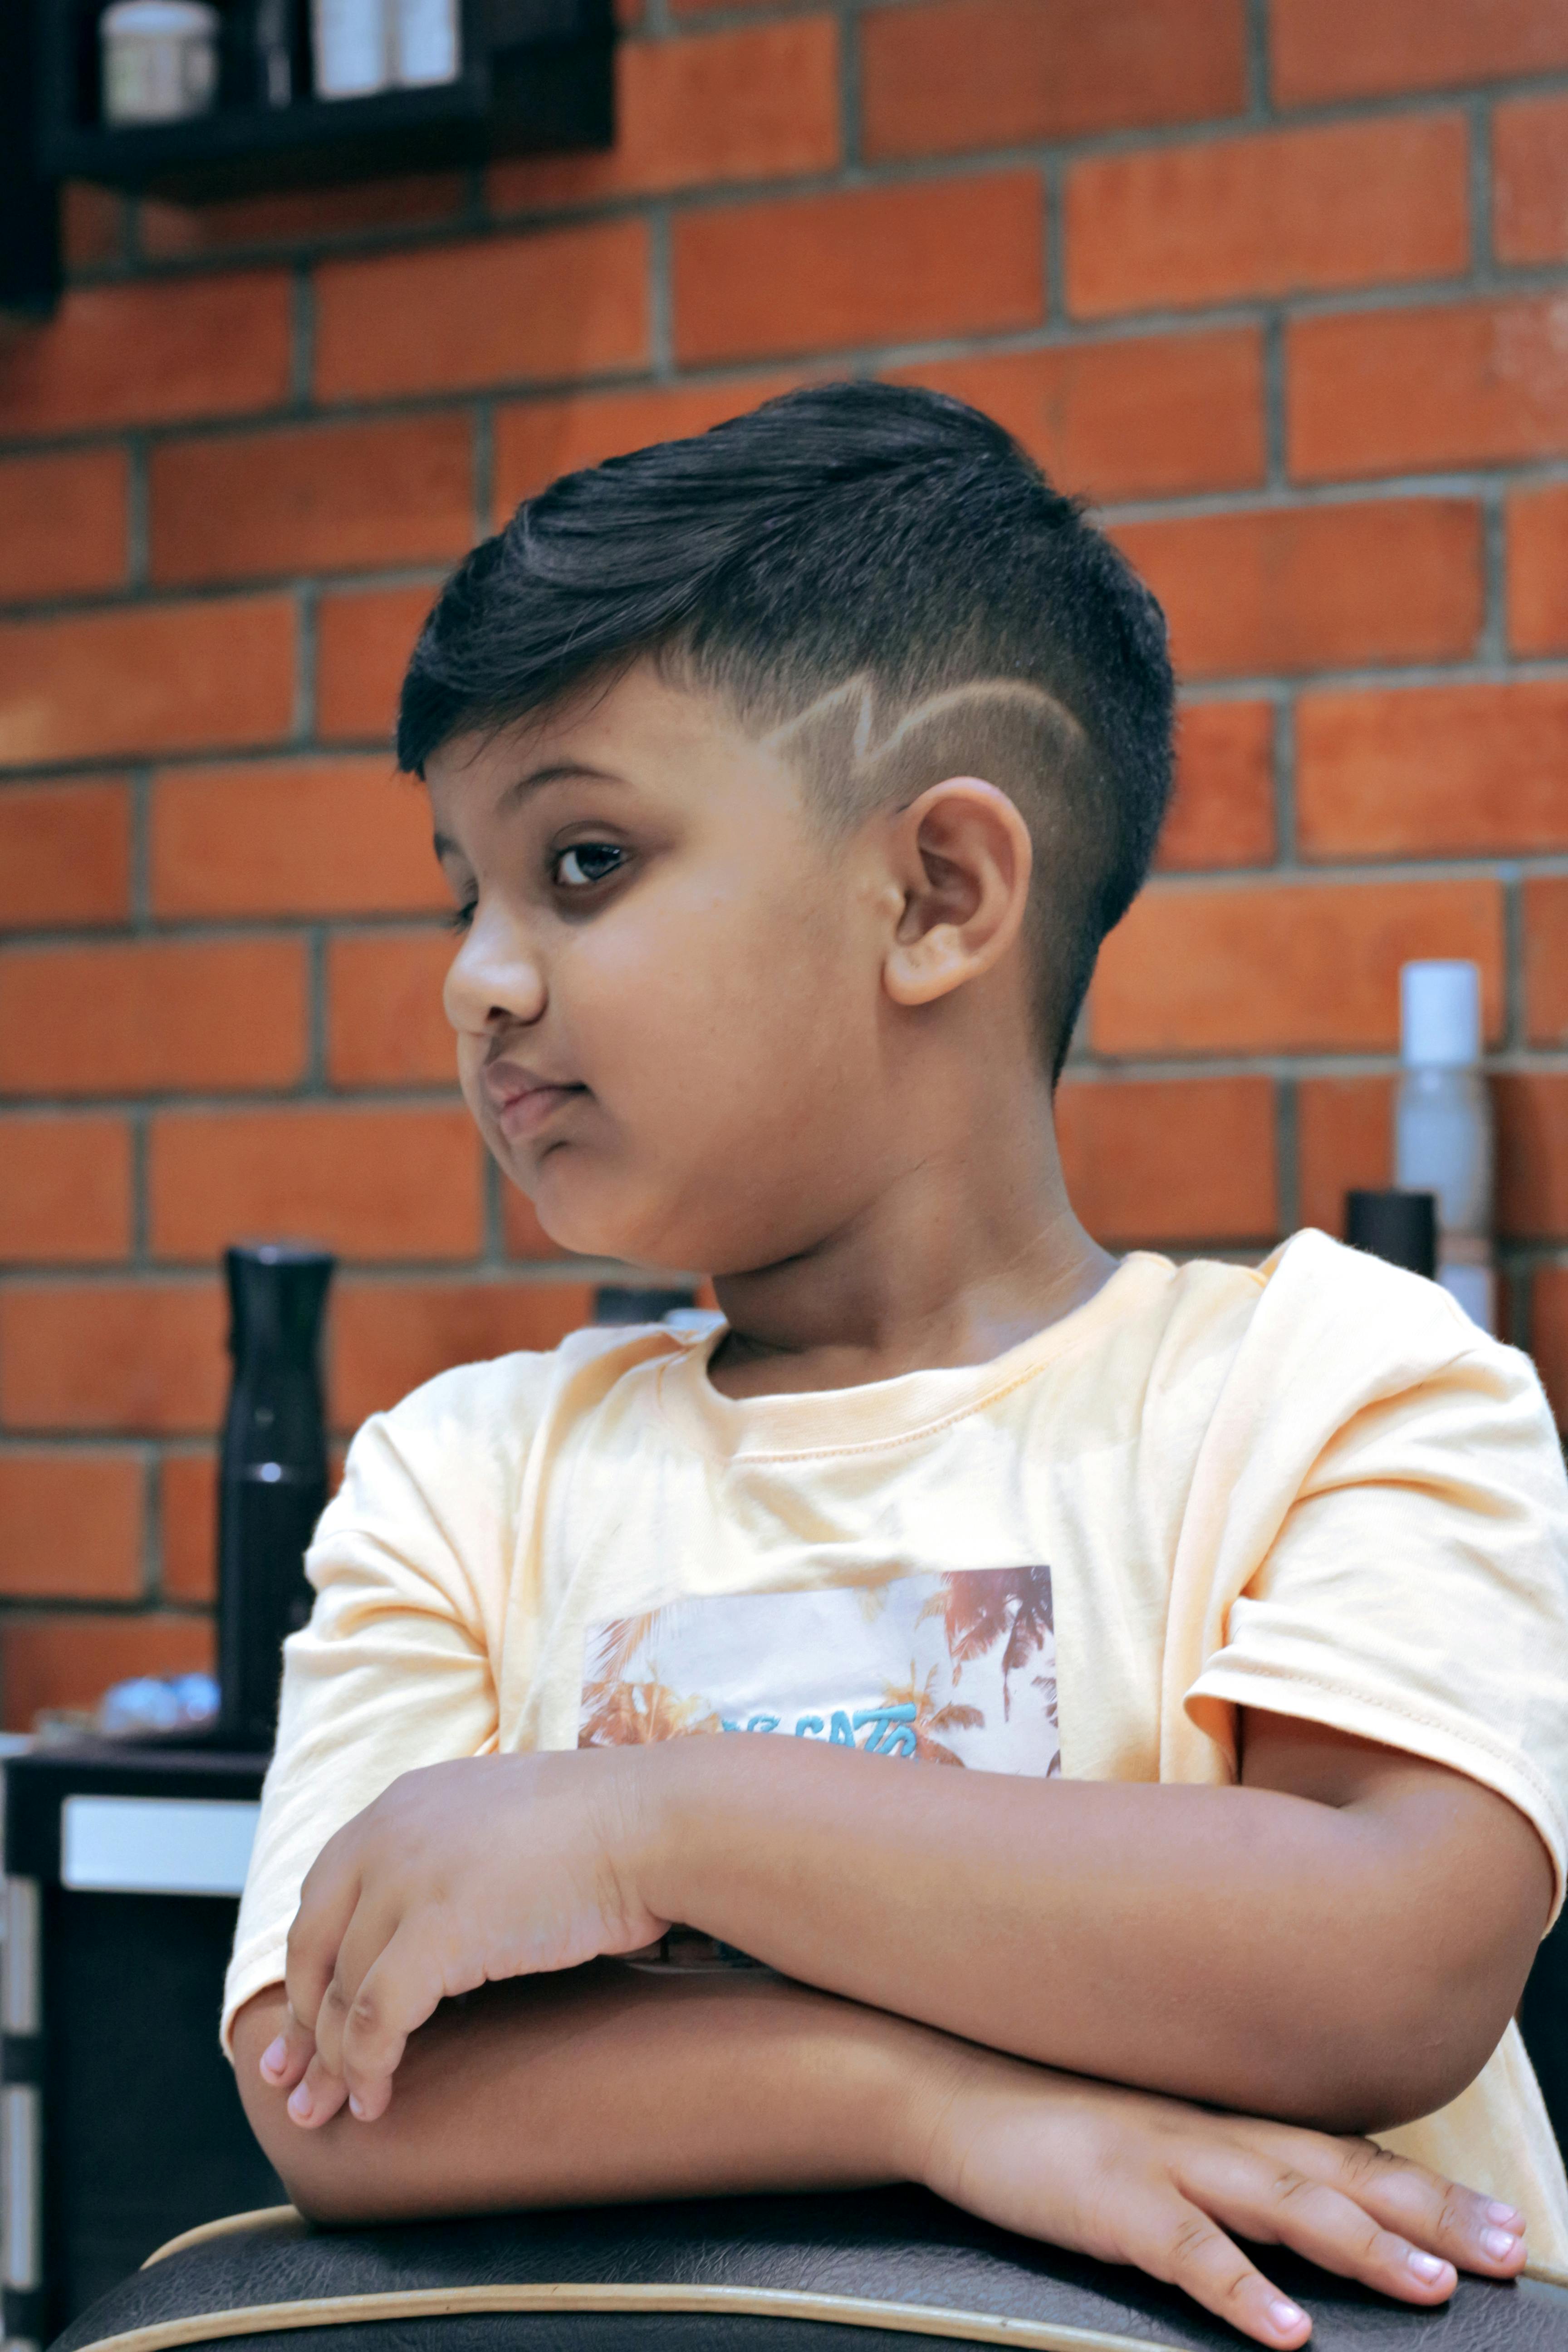 Indian hairstyle for boy added... - Indian hairstyle for boy